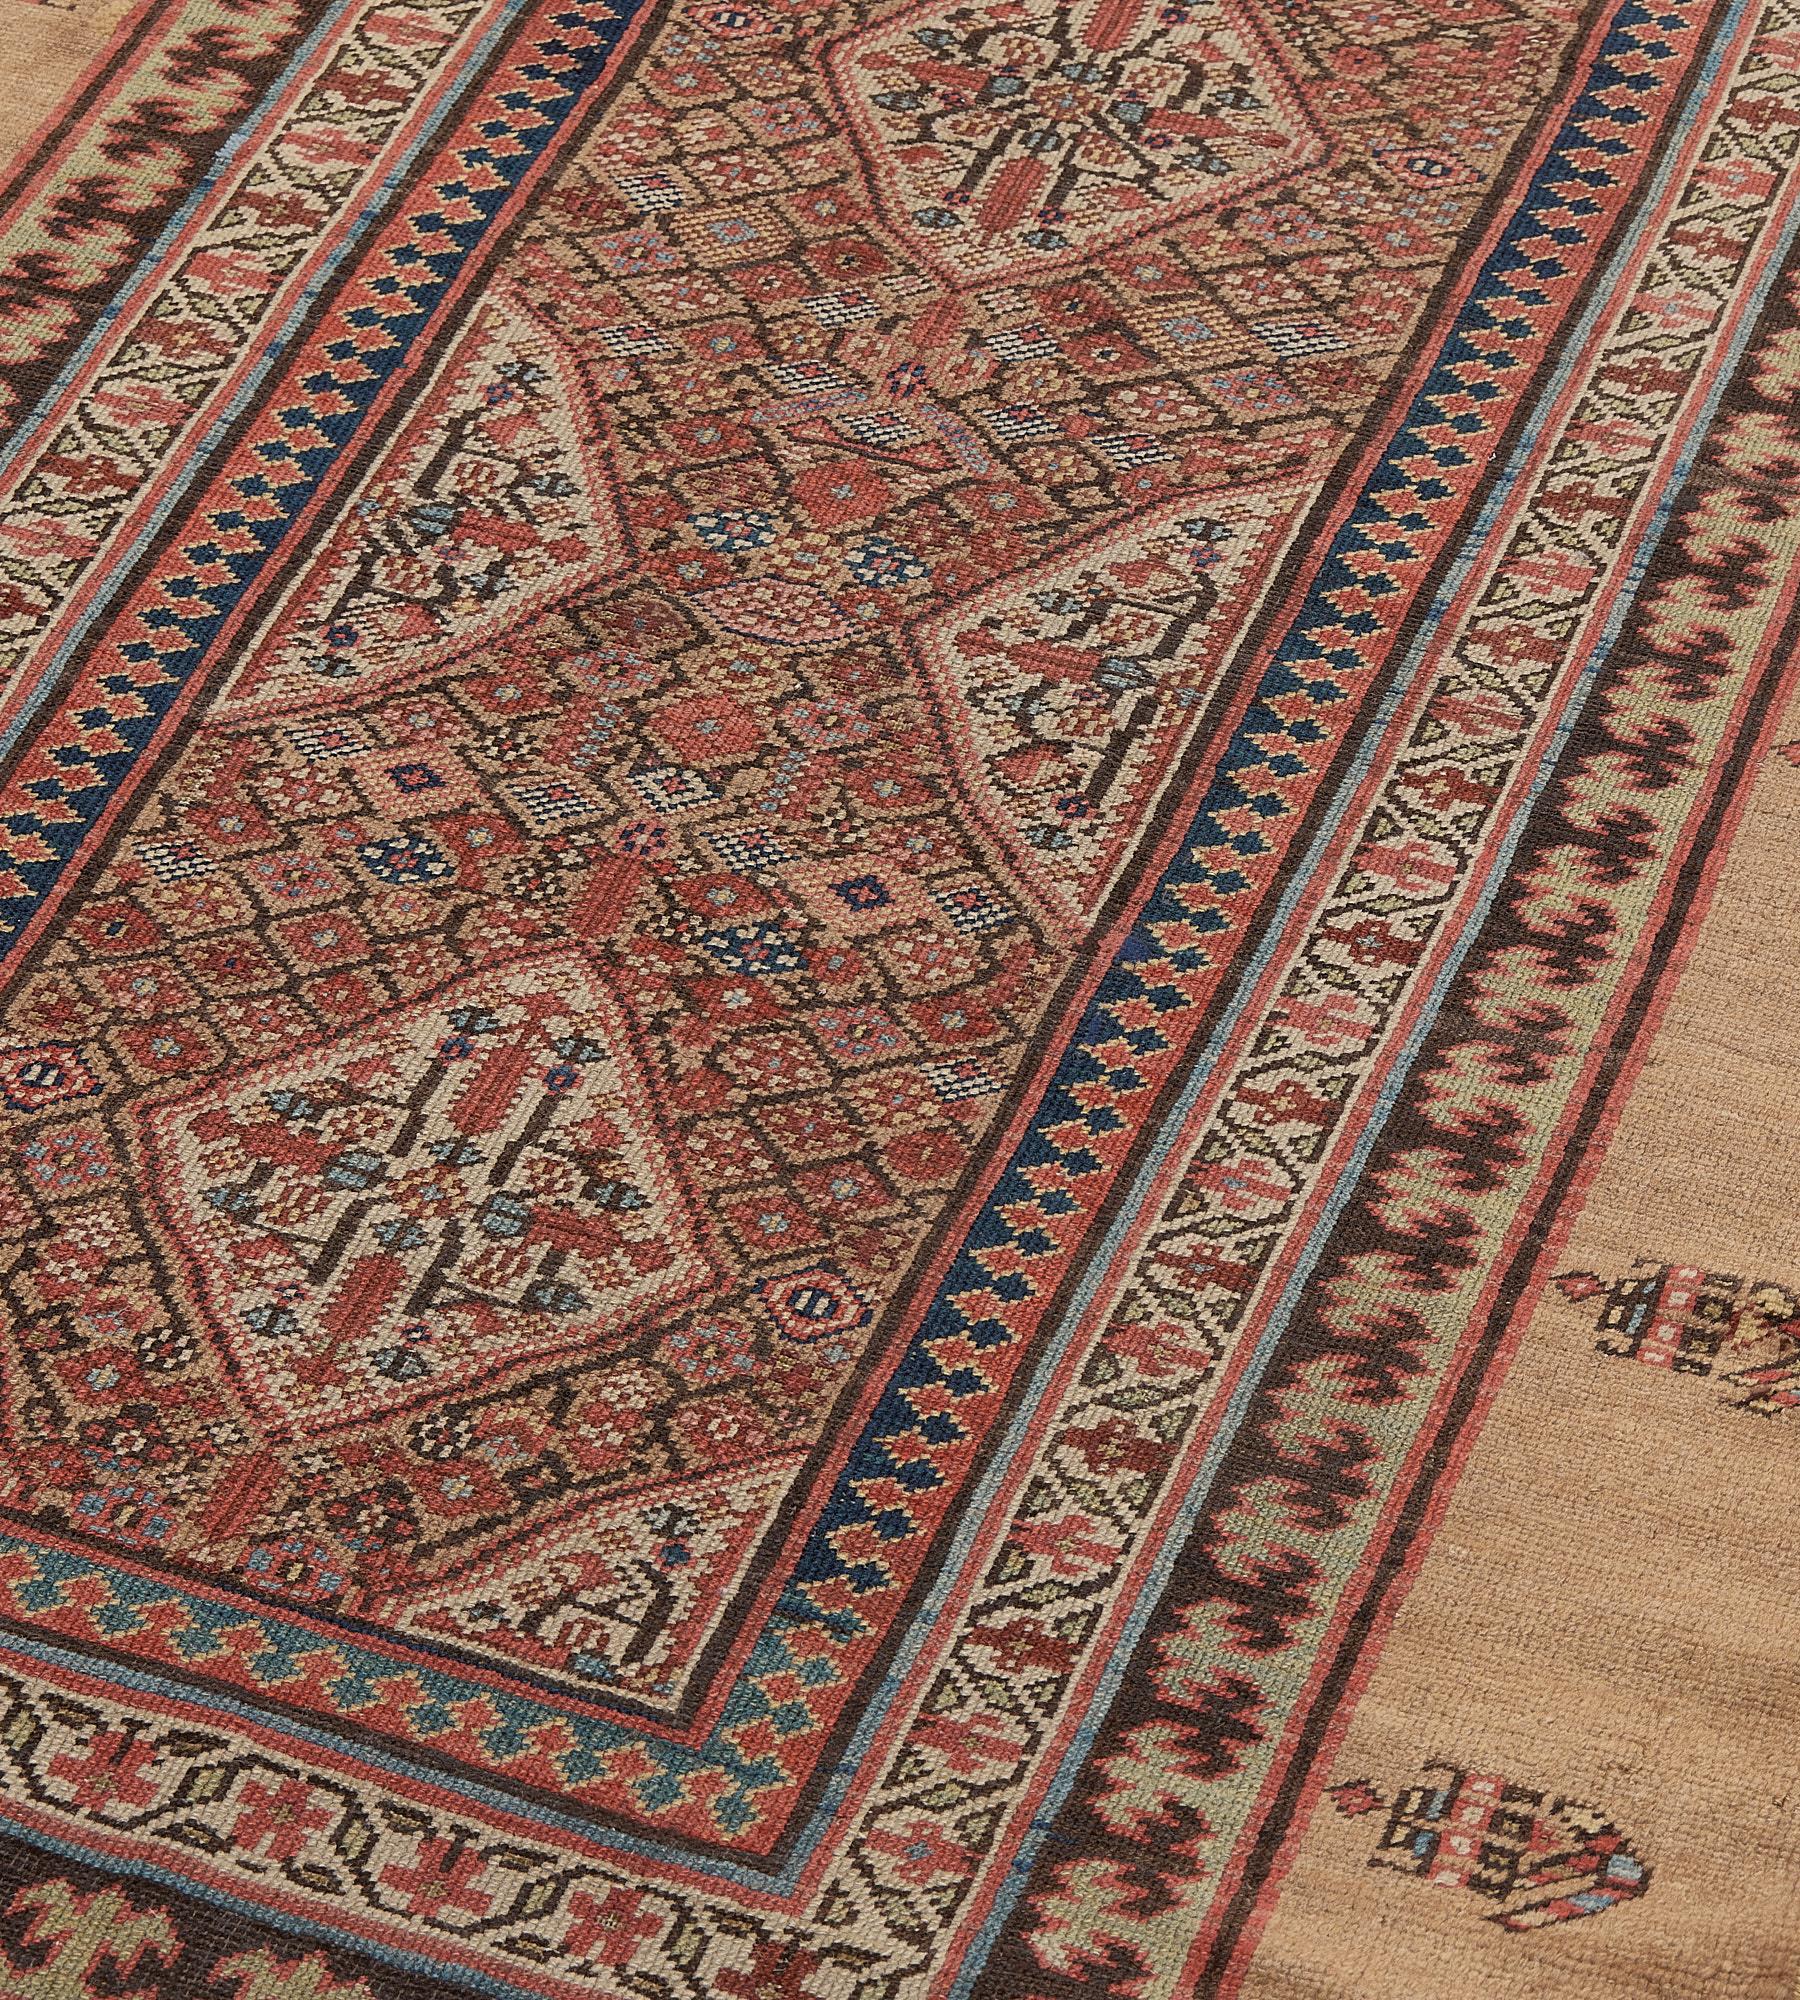 This antique, circa 1870, Persian Serab runner has a camel-brown field with a dense polychrome lozenge lattice around a column of four ivory lozenges each containing a central rosette issuing angular floral vine, three similar ivory part lozenges at